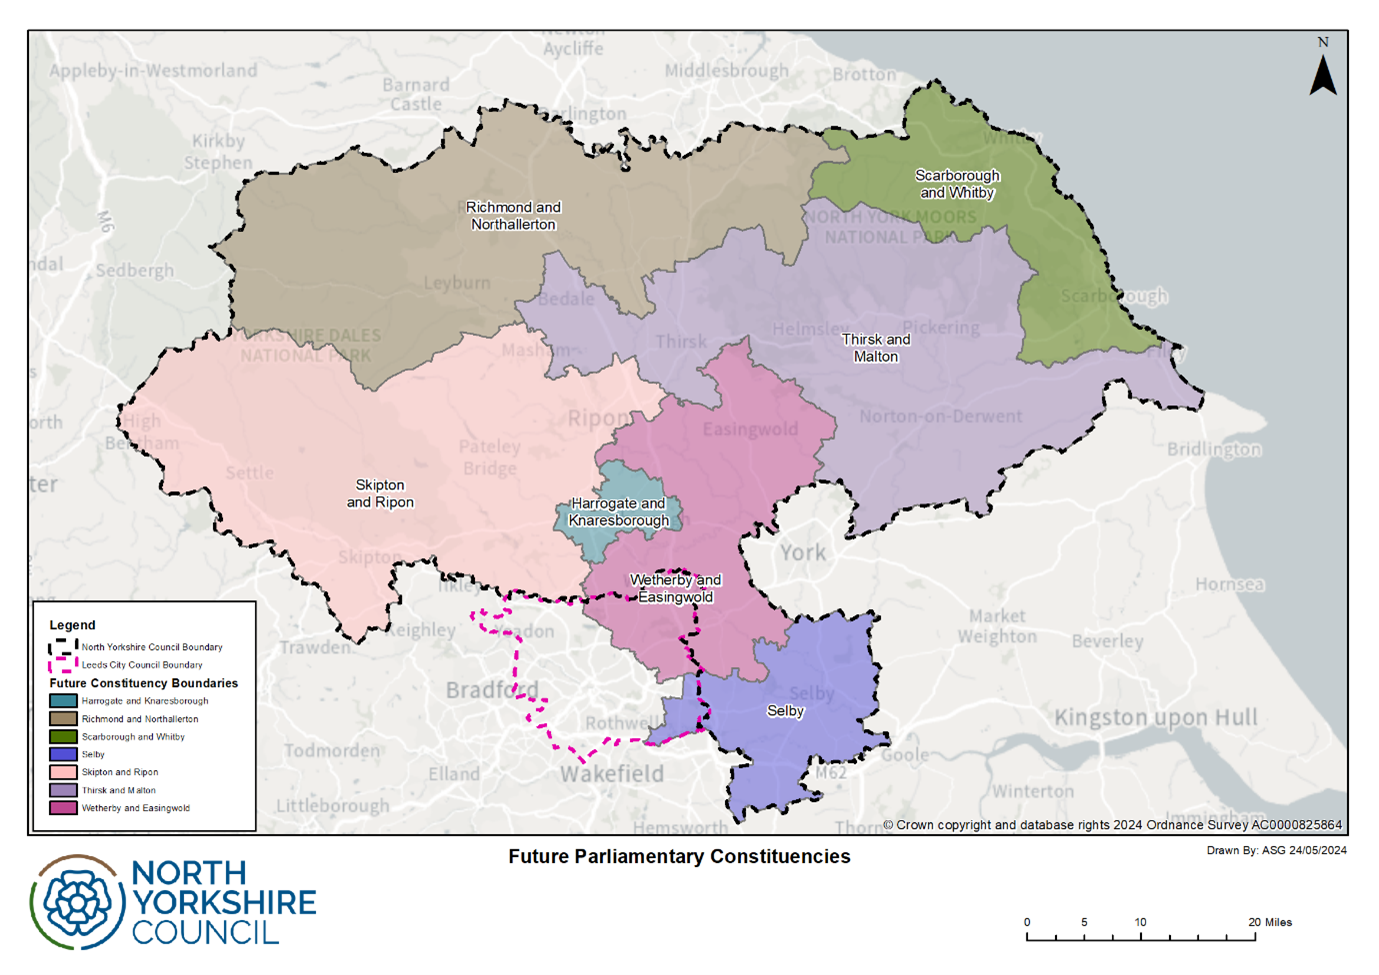 A map showing the 7 new constituency boundaries across North Yorkshire